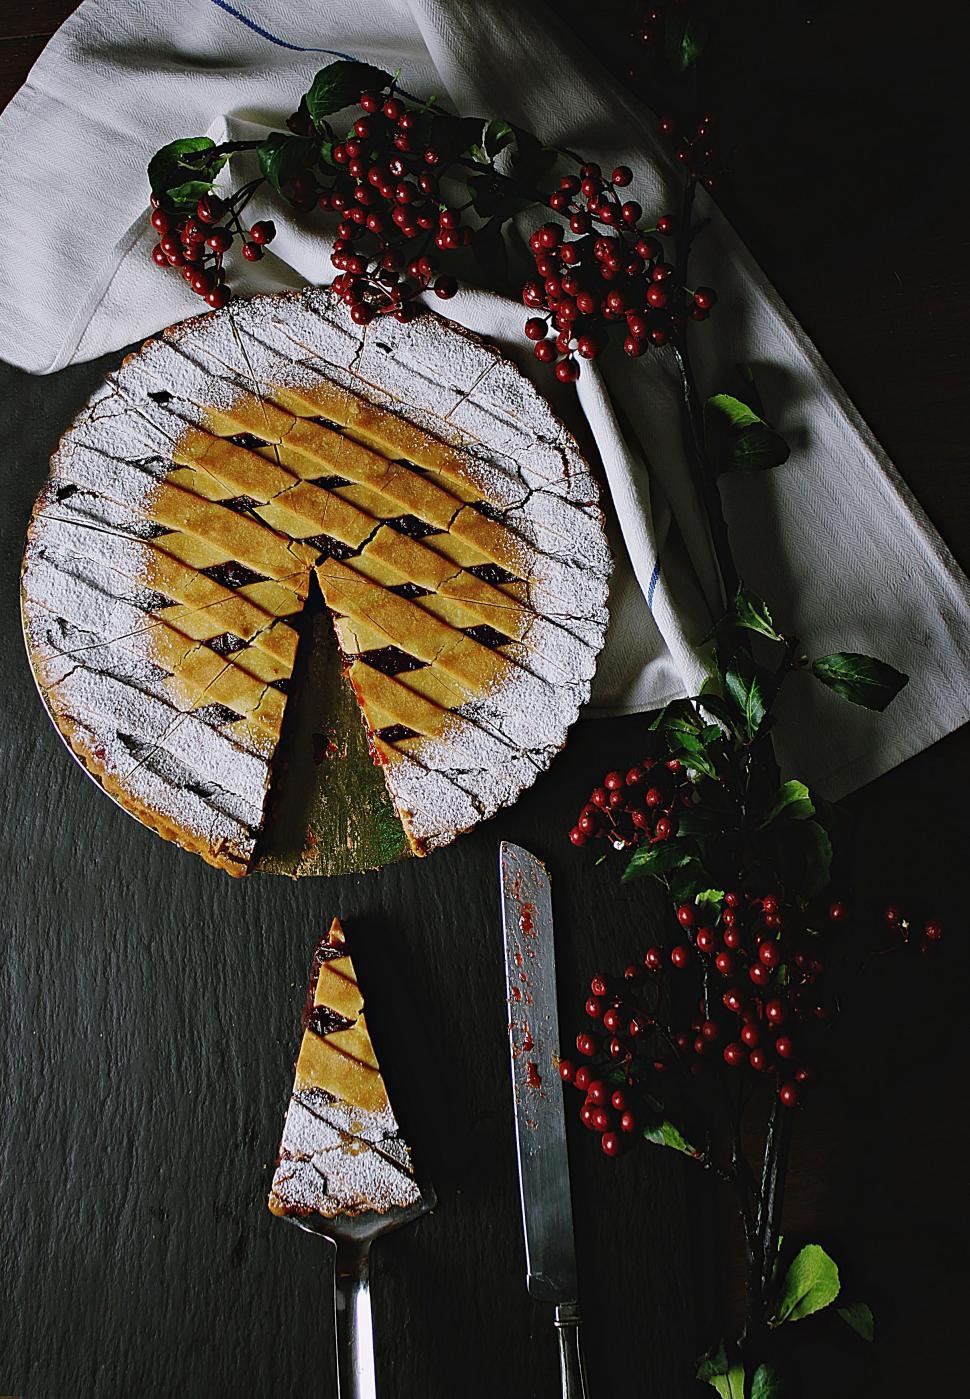 Free Image of Piece of Pie and Knife on Table 